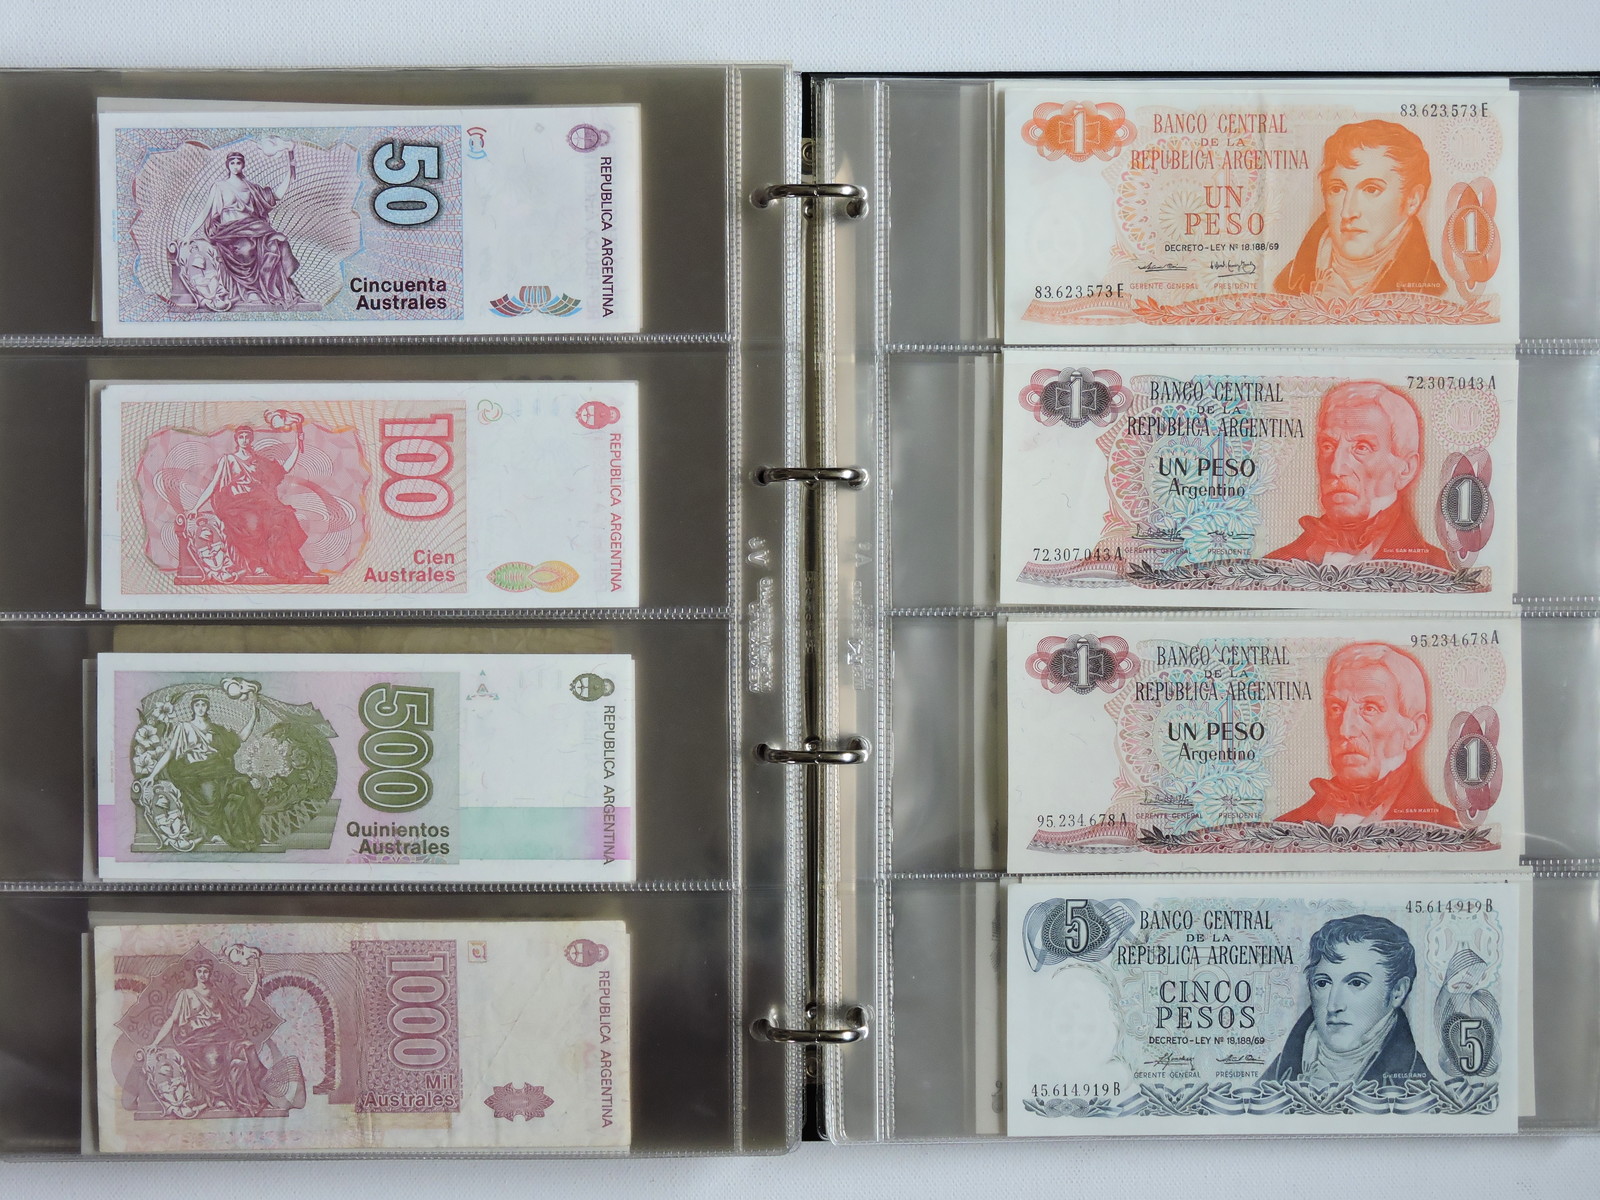 Banknotes, Brazil and Argentina
, page:33, item:1